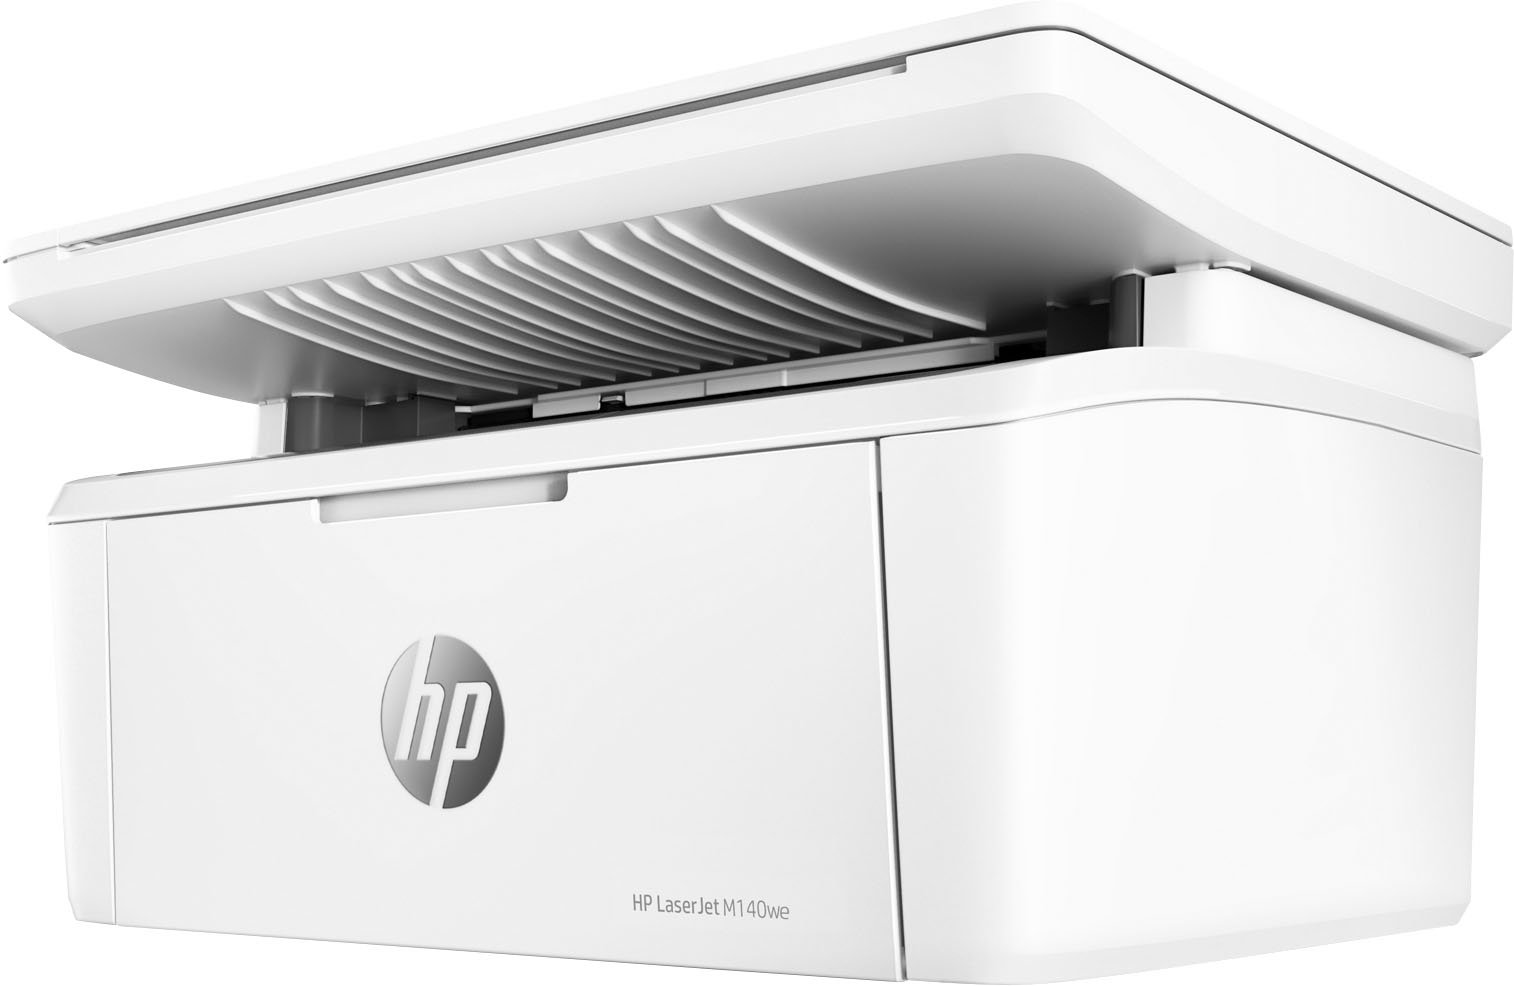 Buy - Ink M140we months HP Instant included White HP+ of White Laser Best Wireless Printer with LaserJet with M140we LaserJet Black and 6